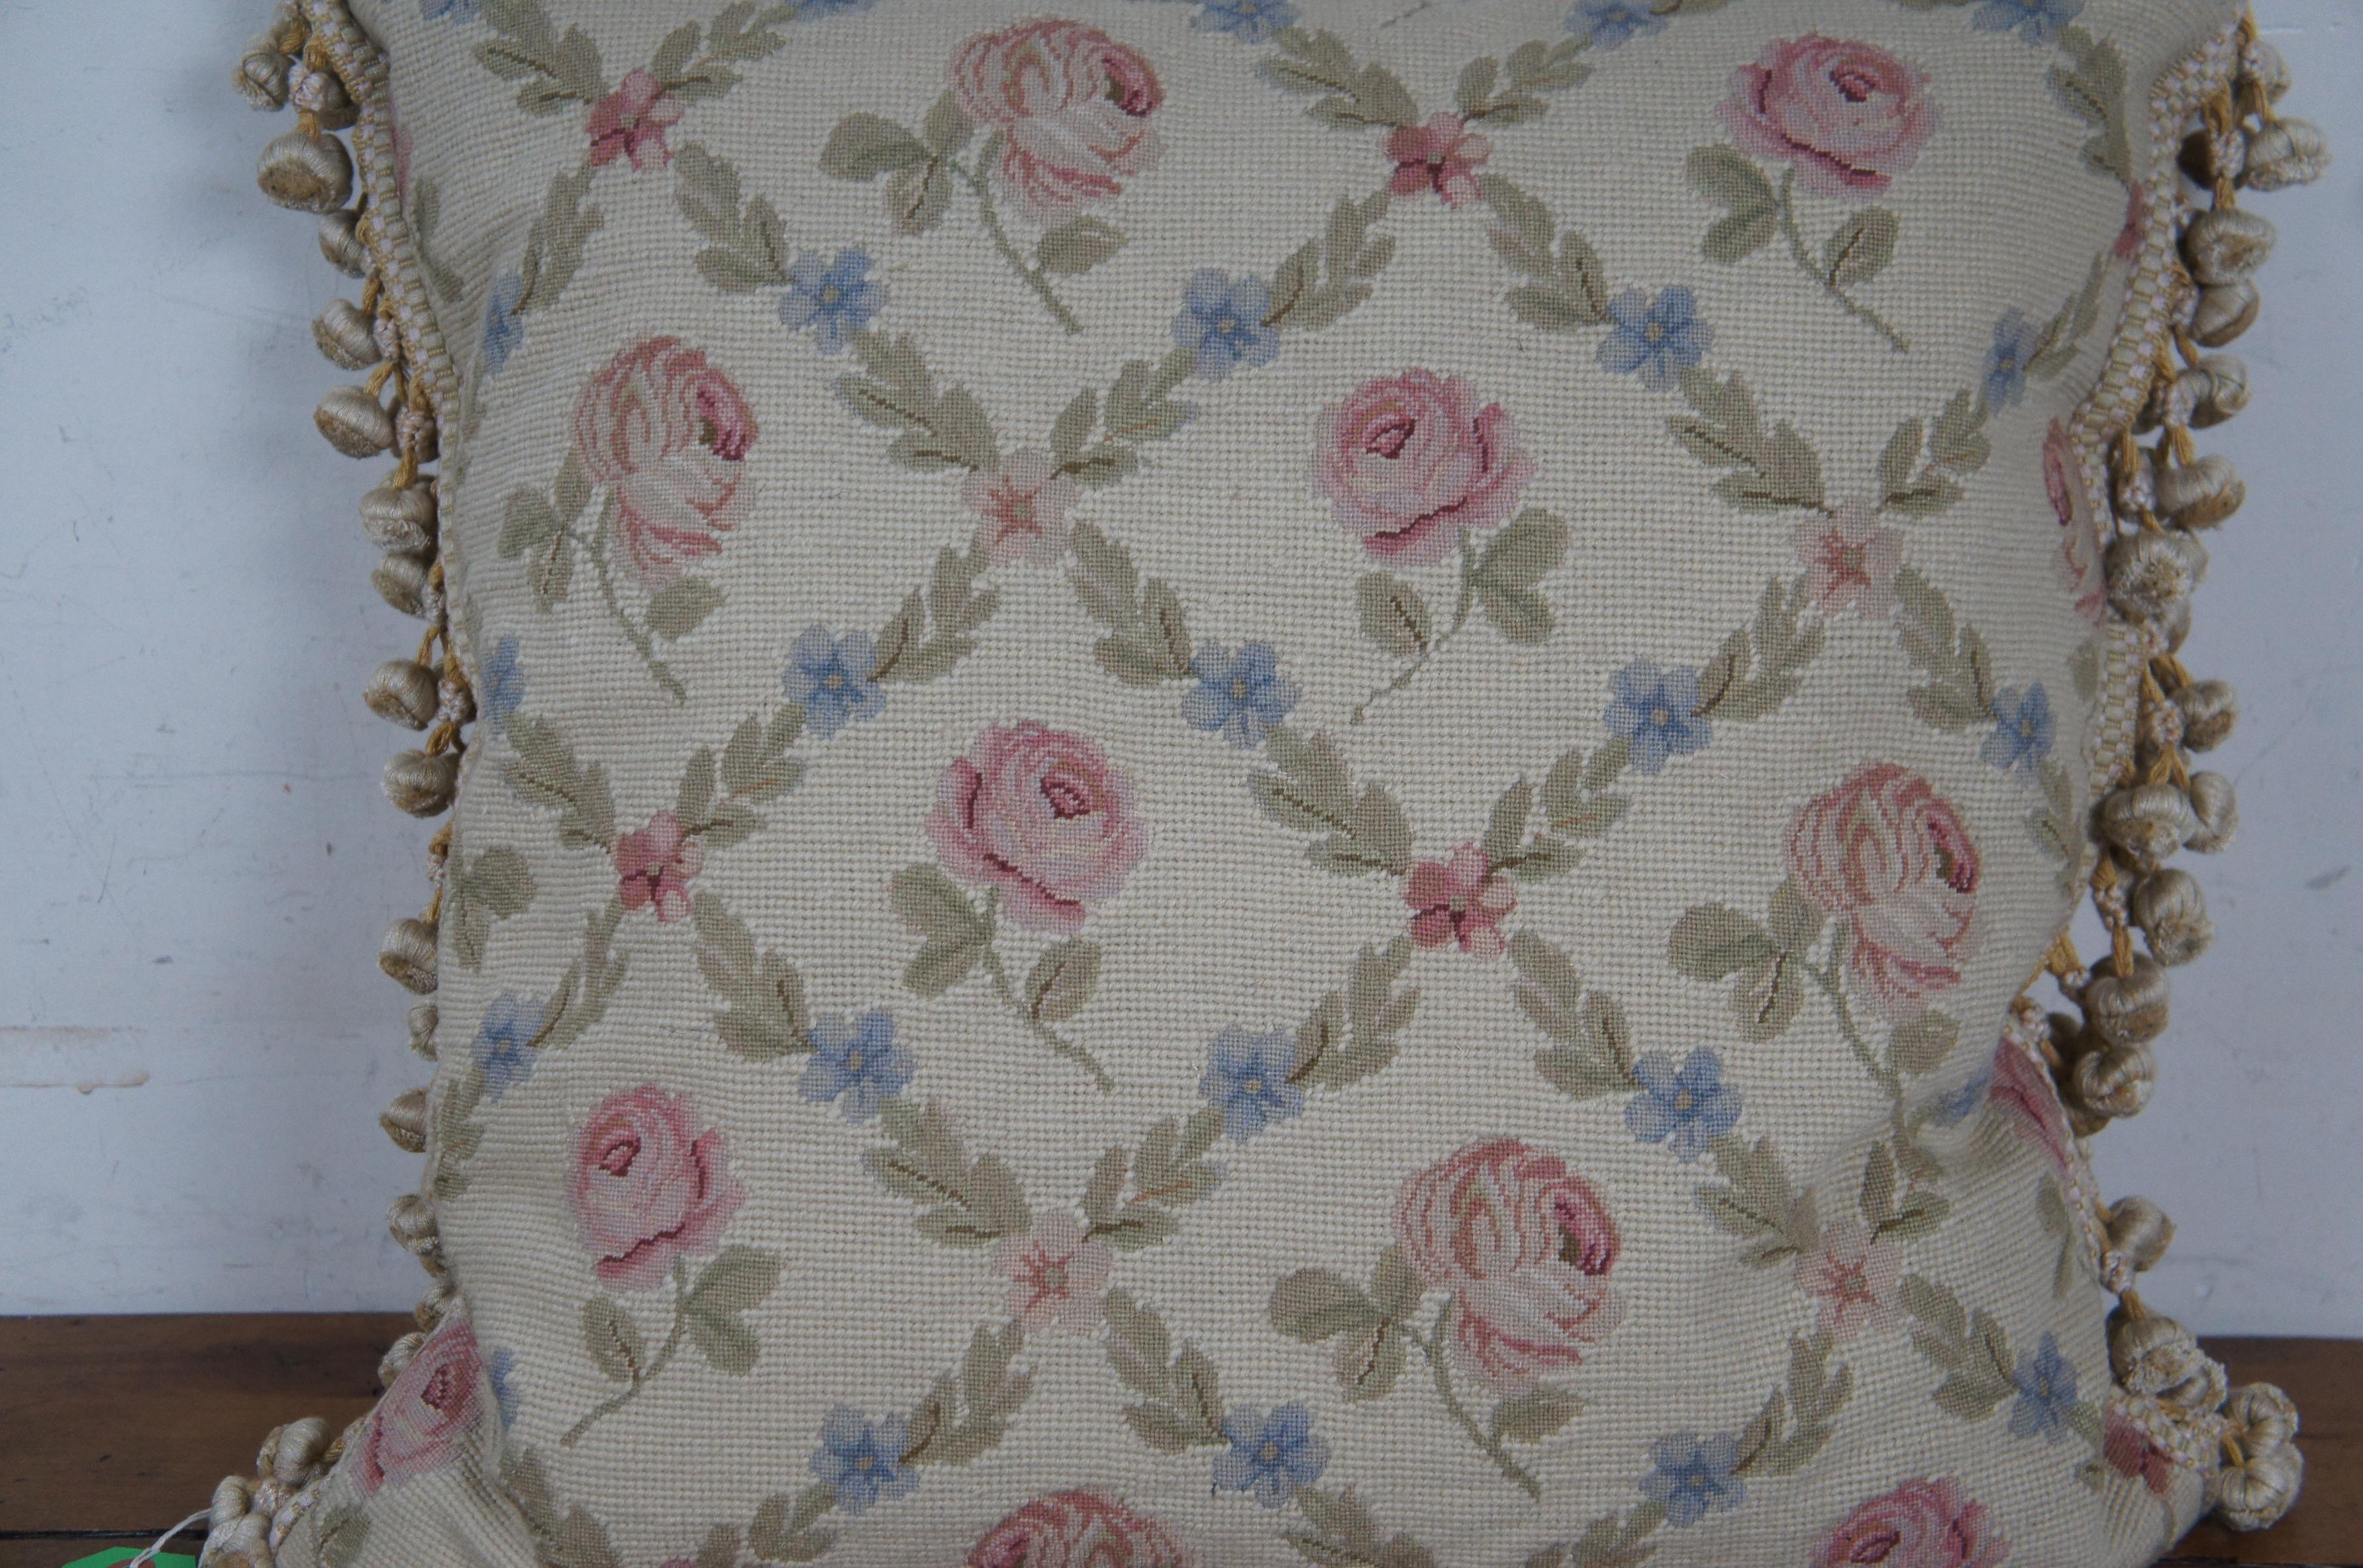 20th Century Down Filled Floral Crossed Roses Needlepoint Tassel Lumbar Throw Pillow 22